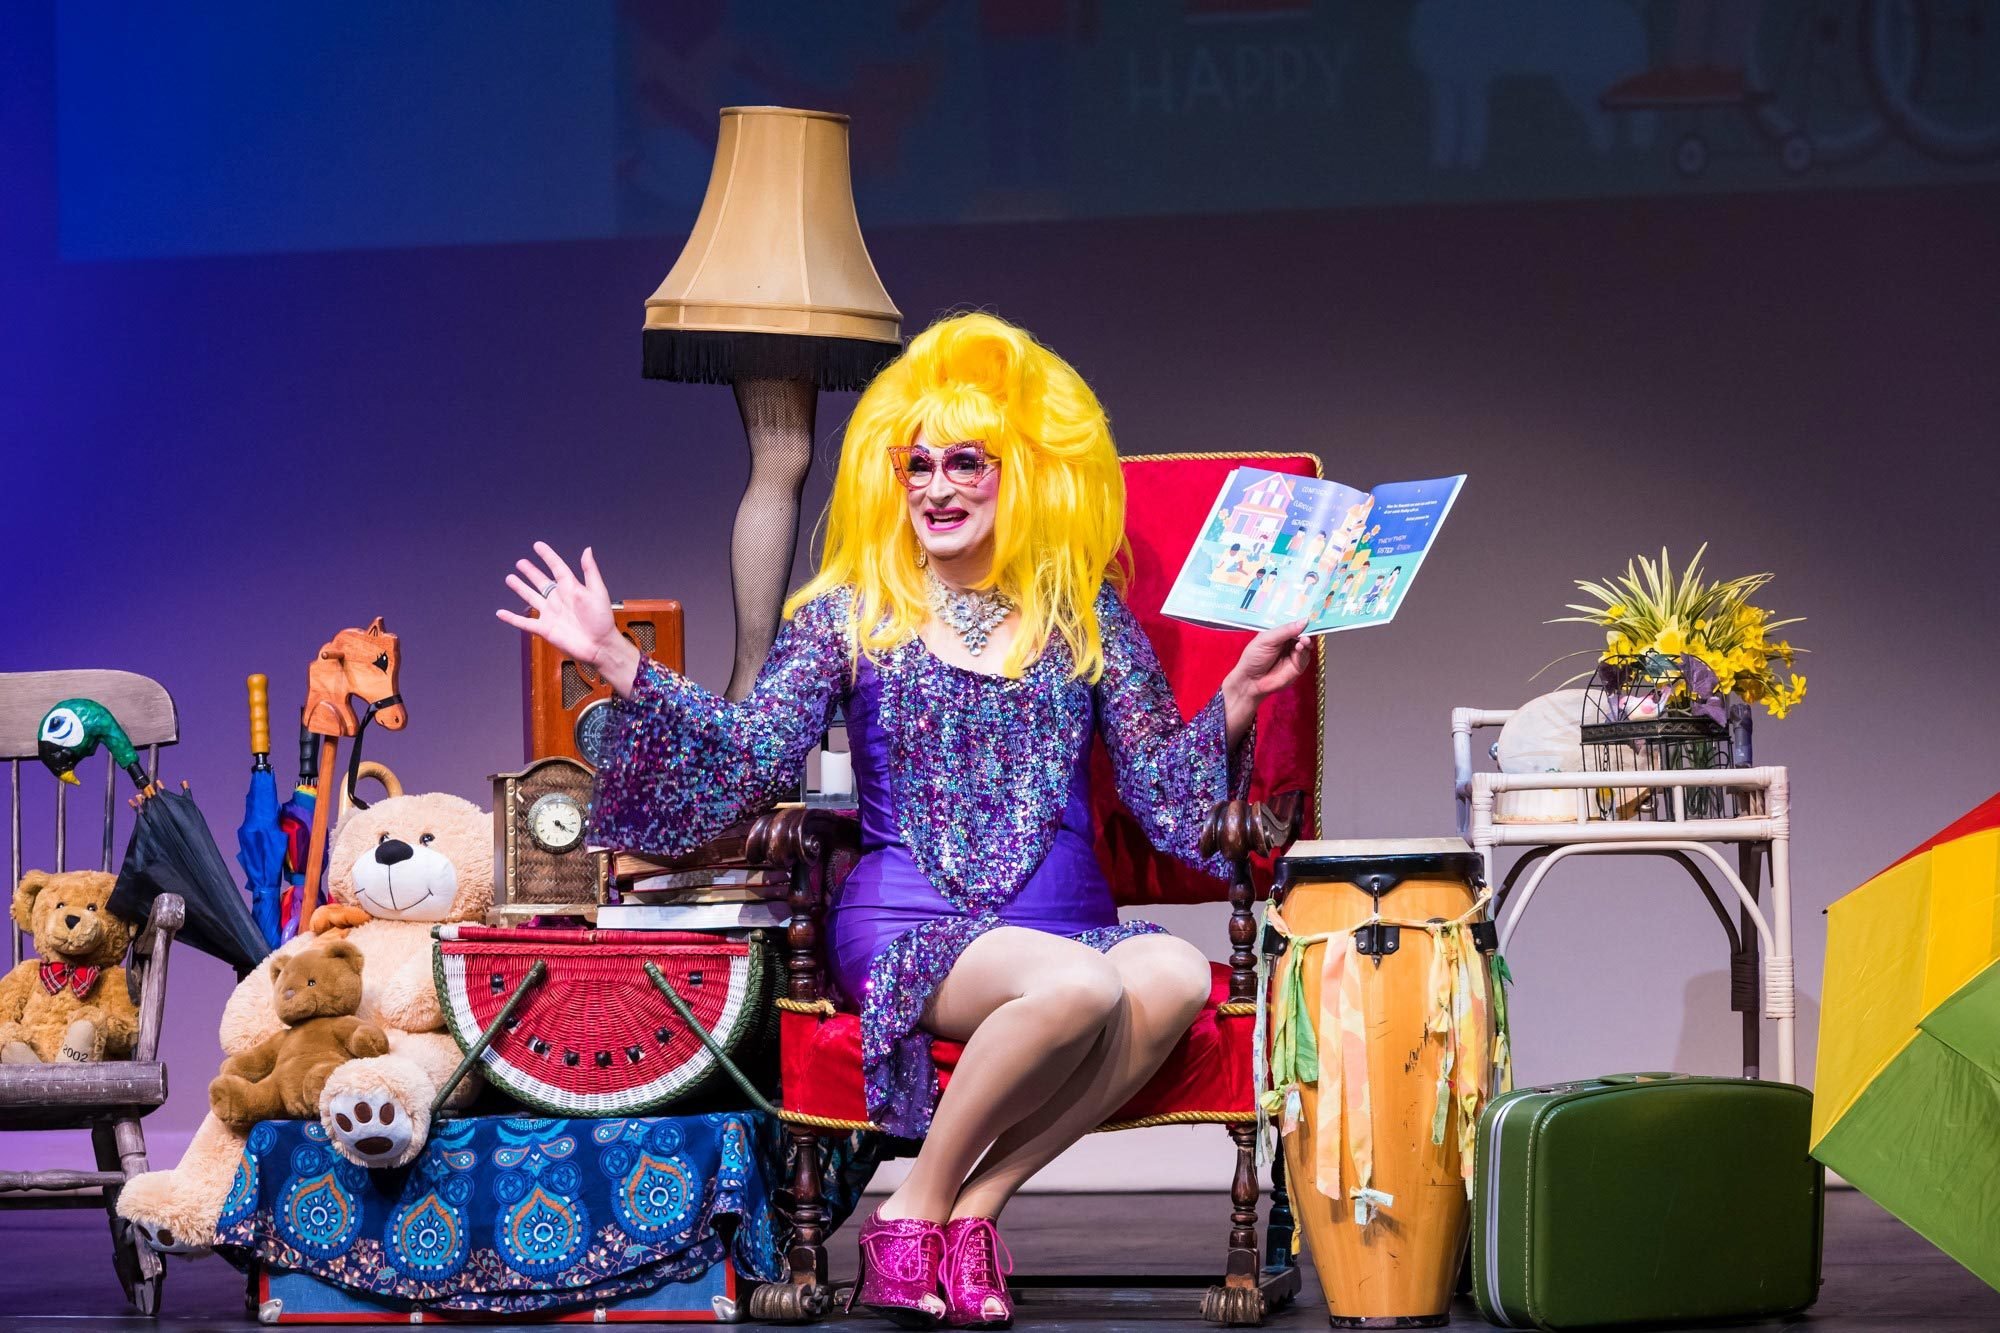 What Happens At Drag Queen Story Hour